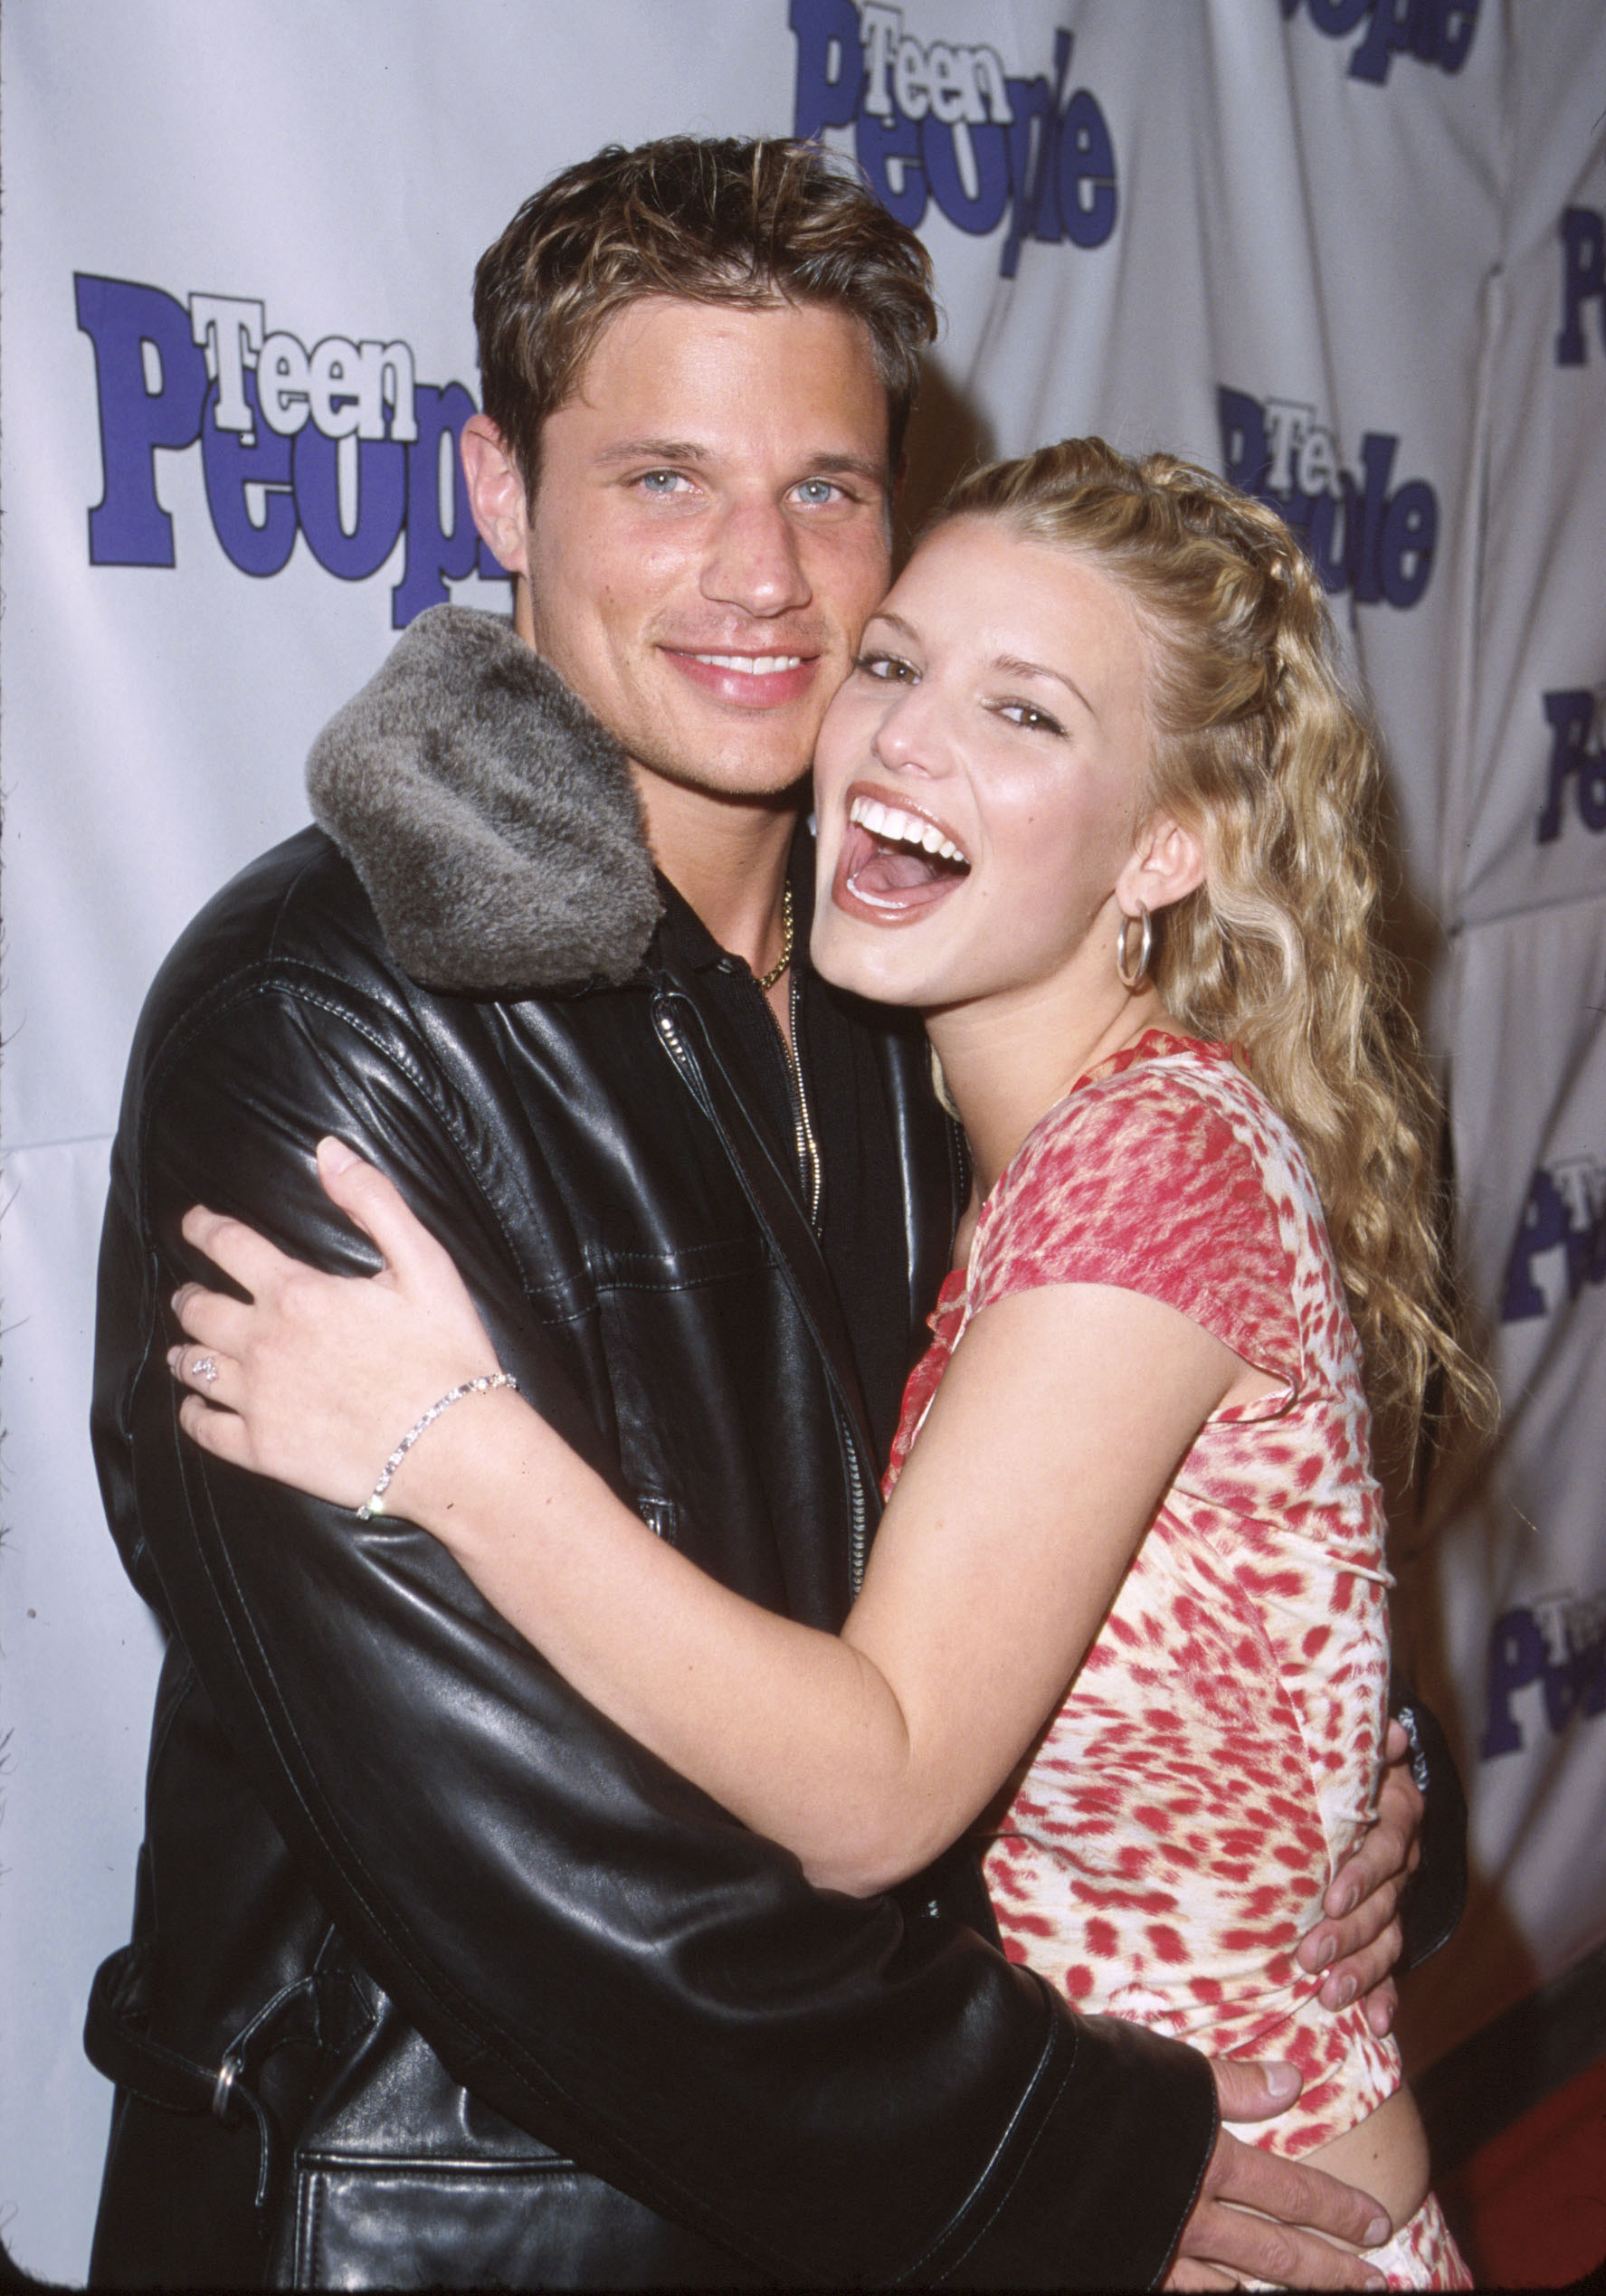 Jessica Simpson Reveals Her Marriage to Nick Lachey Was Her